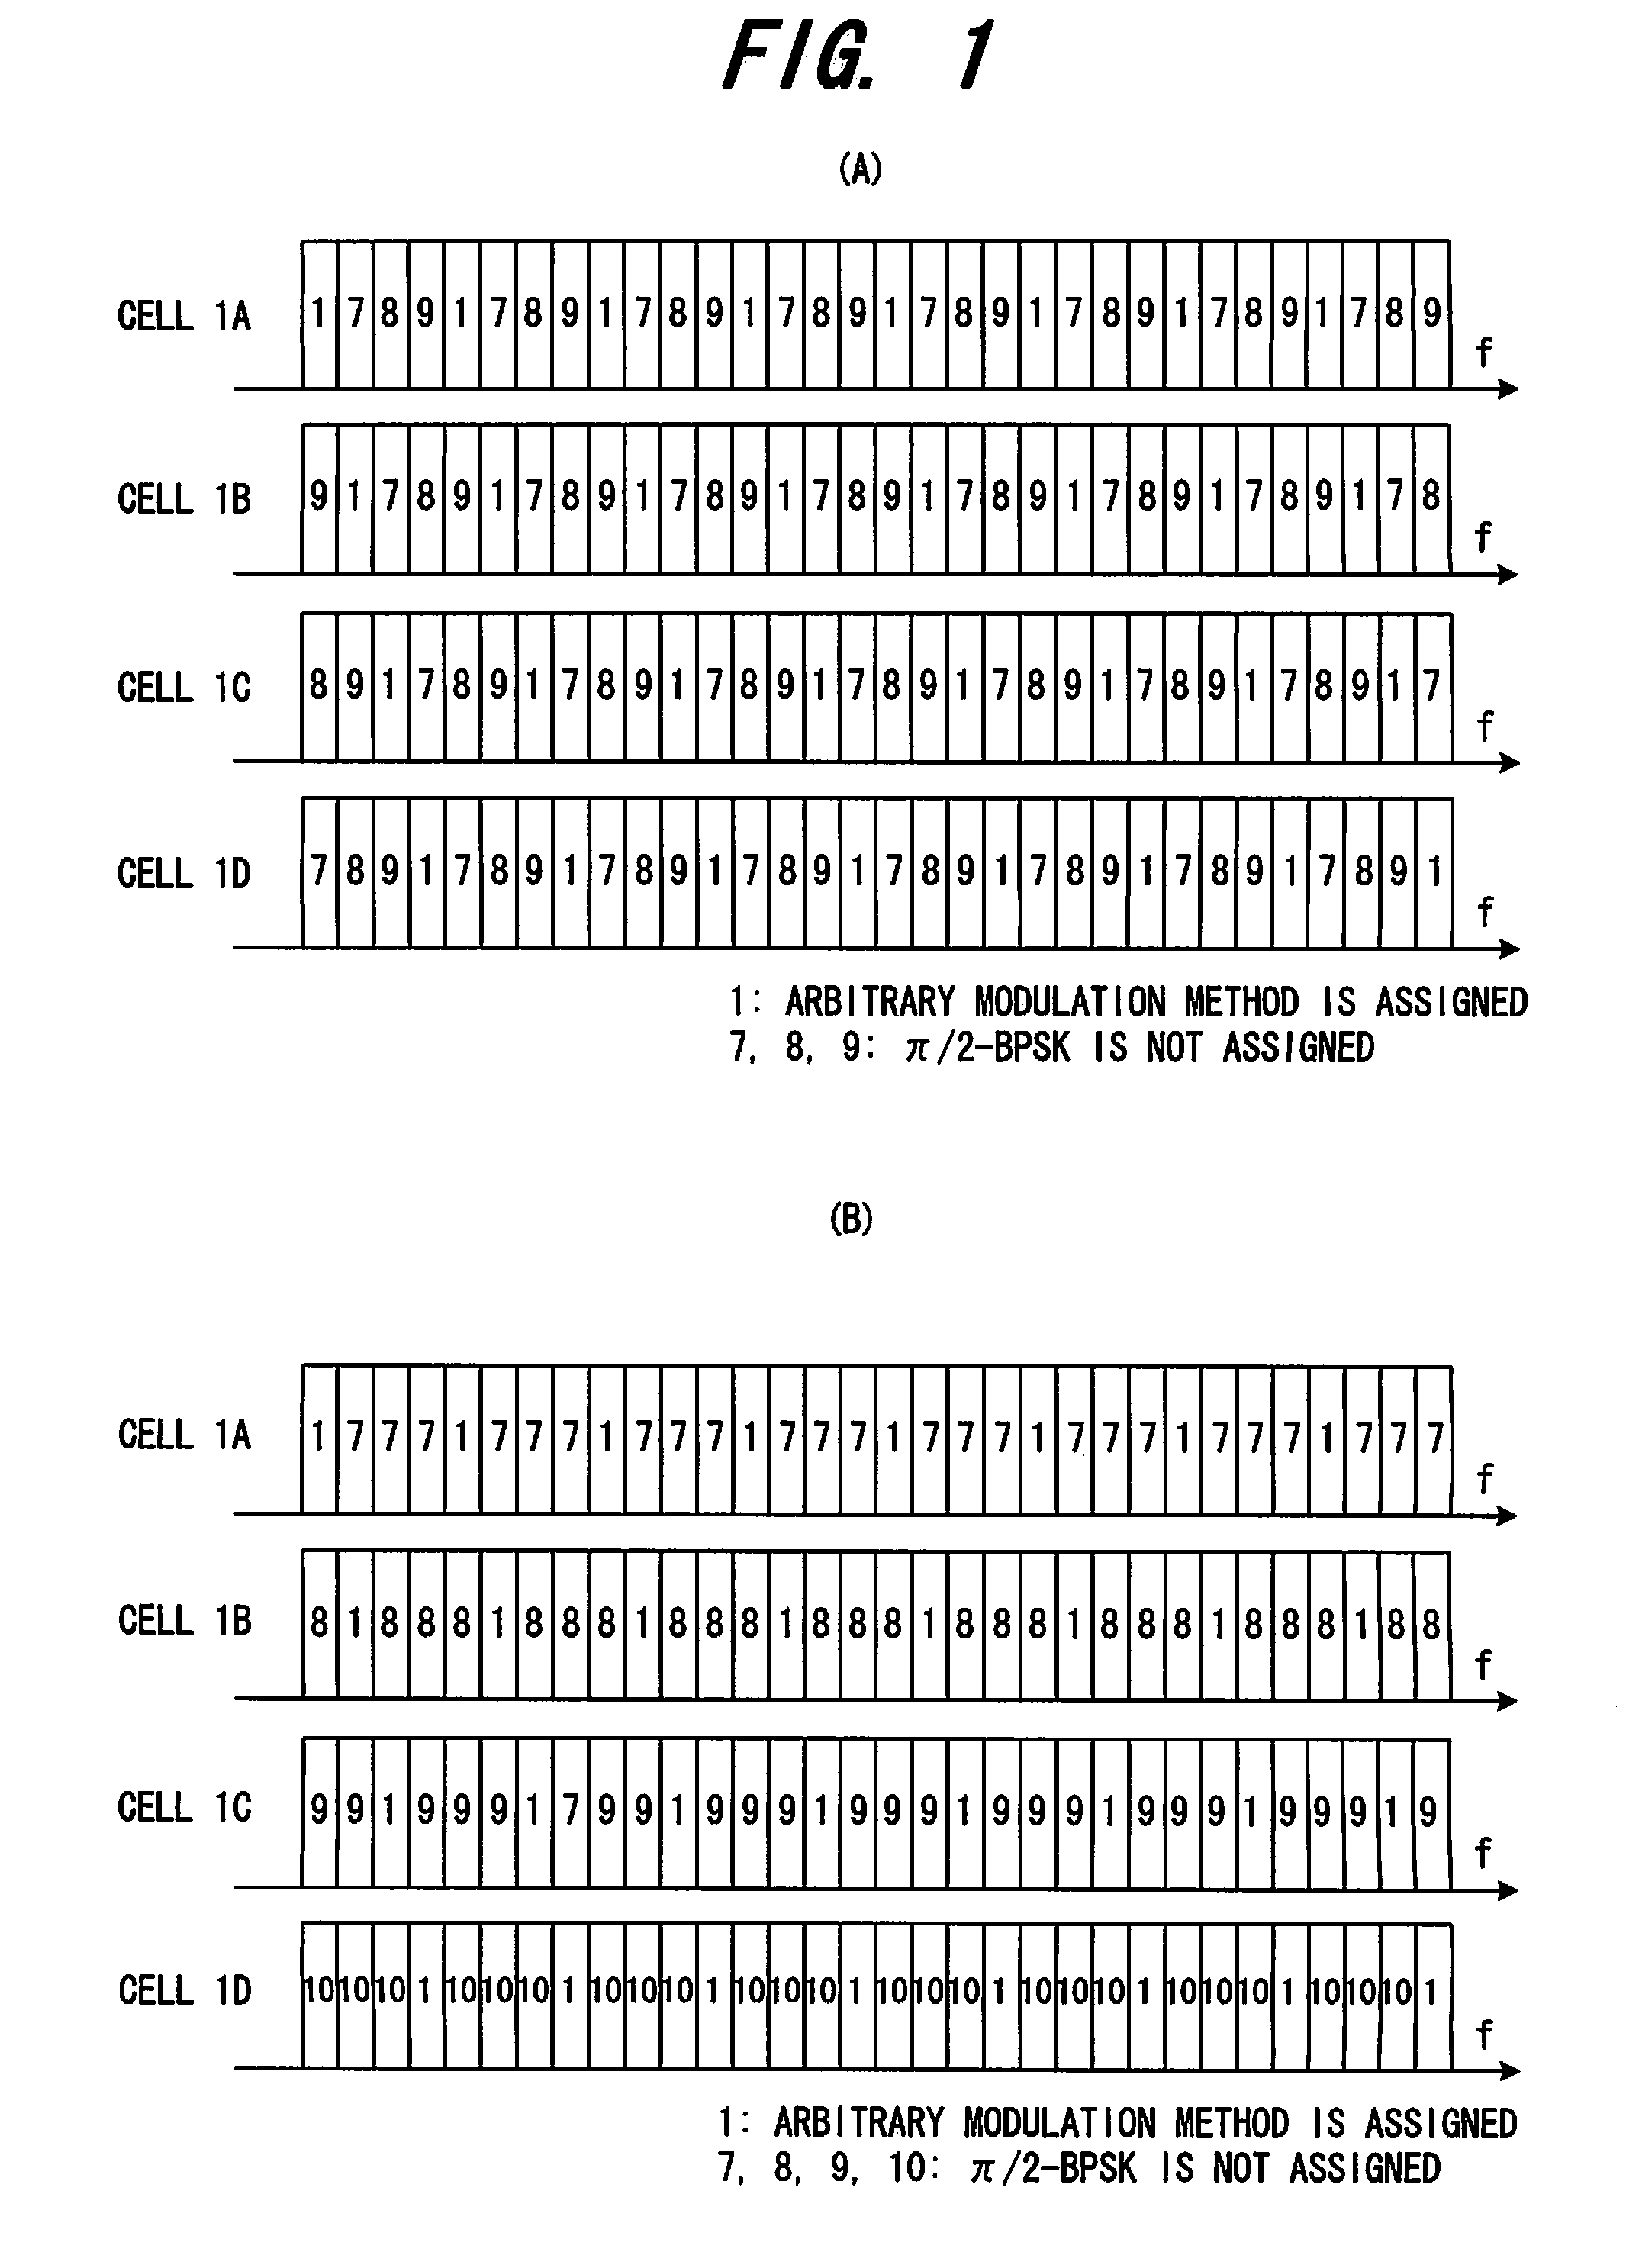 Base Station And Method Of Assigning Frequencies To Pilot Sequences